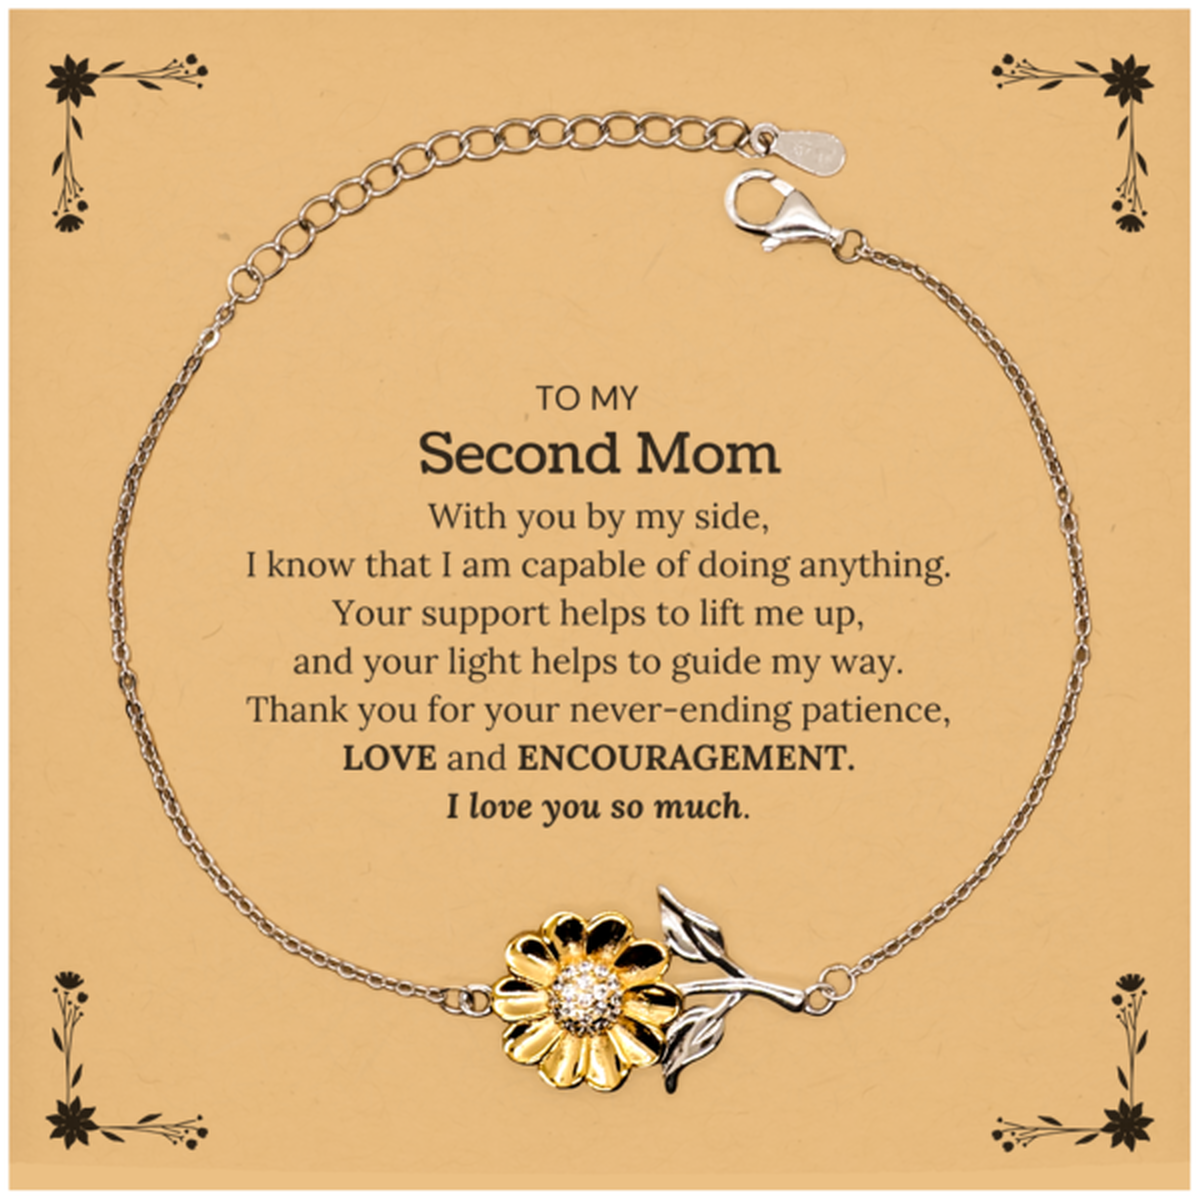 Appreciation Second Mom Sunflower Bracelet Gifts, To My Second Mom Birthday Christmas Wedding Keepsake Gifts for Second Mom With you by my side, I know that I am capable of doing anything. I love you so much